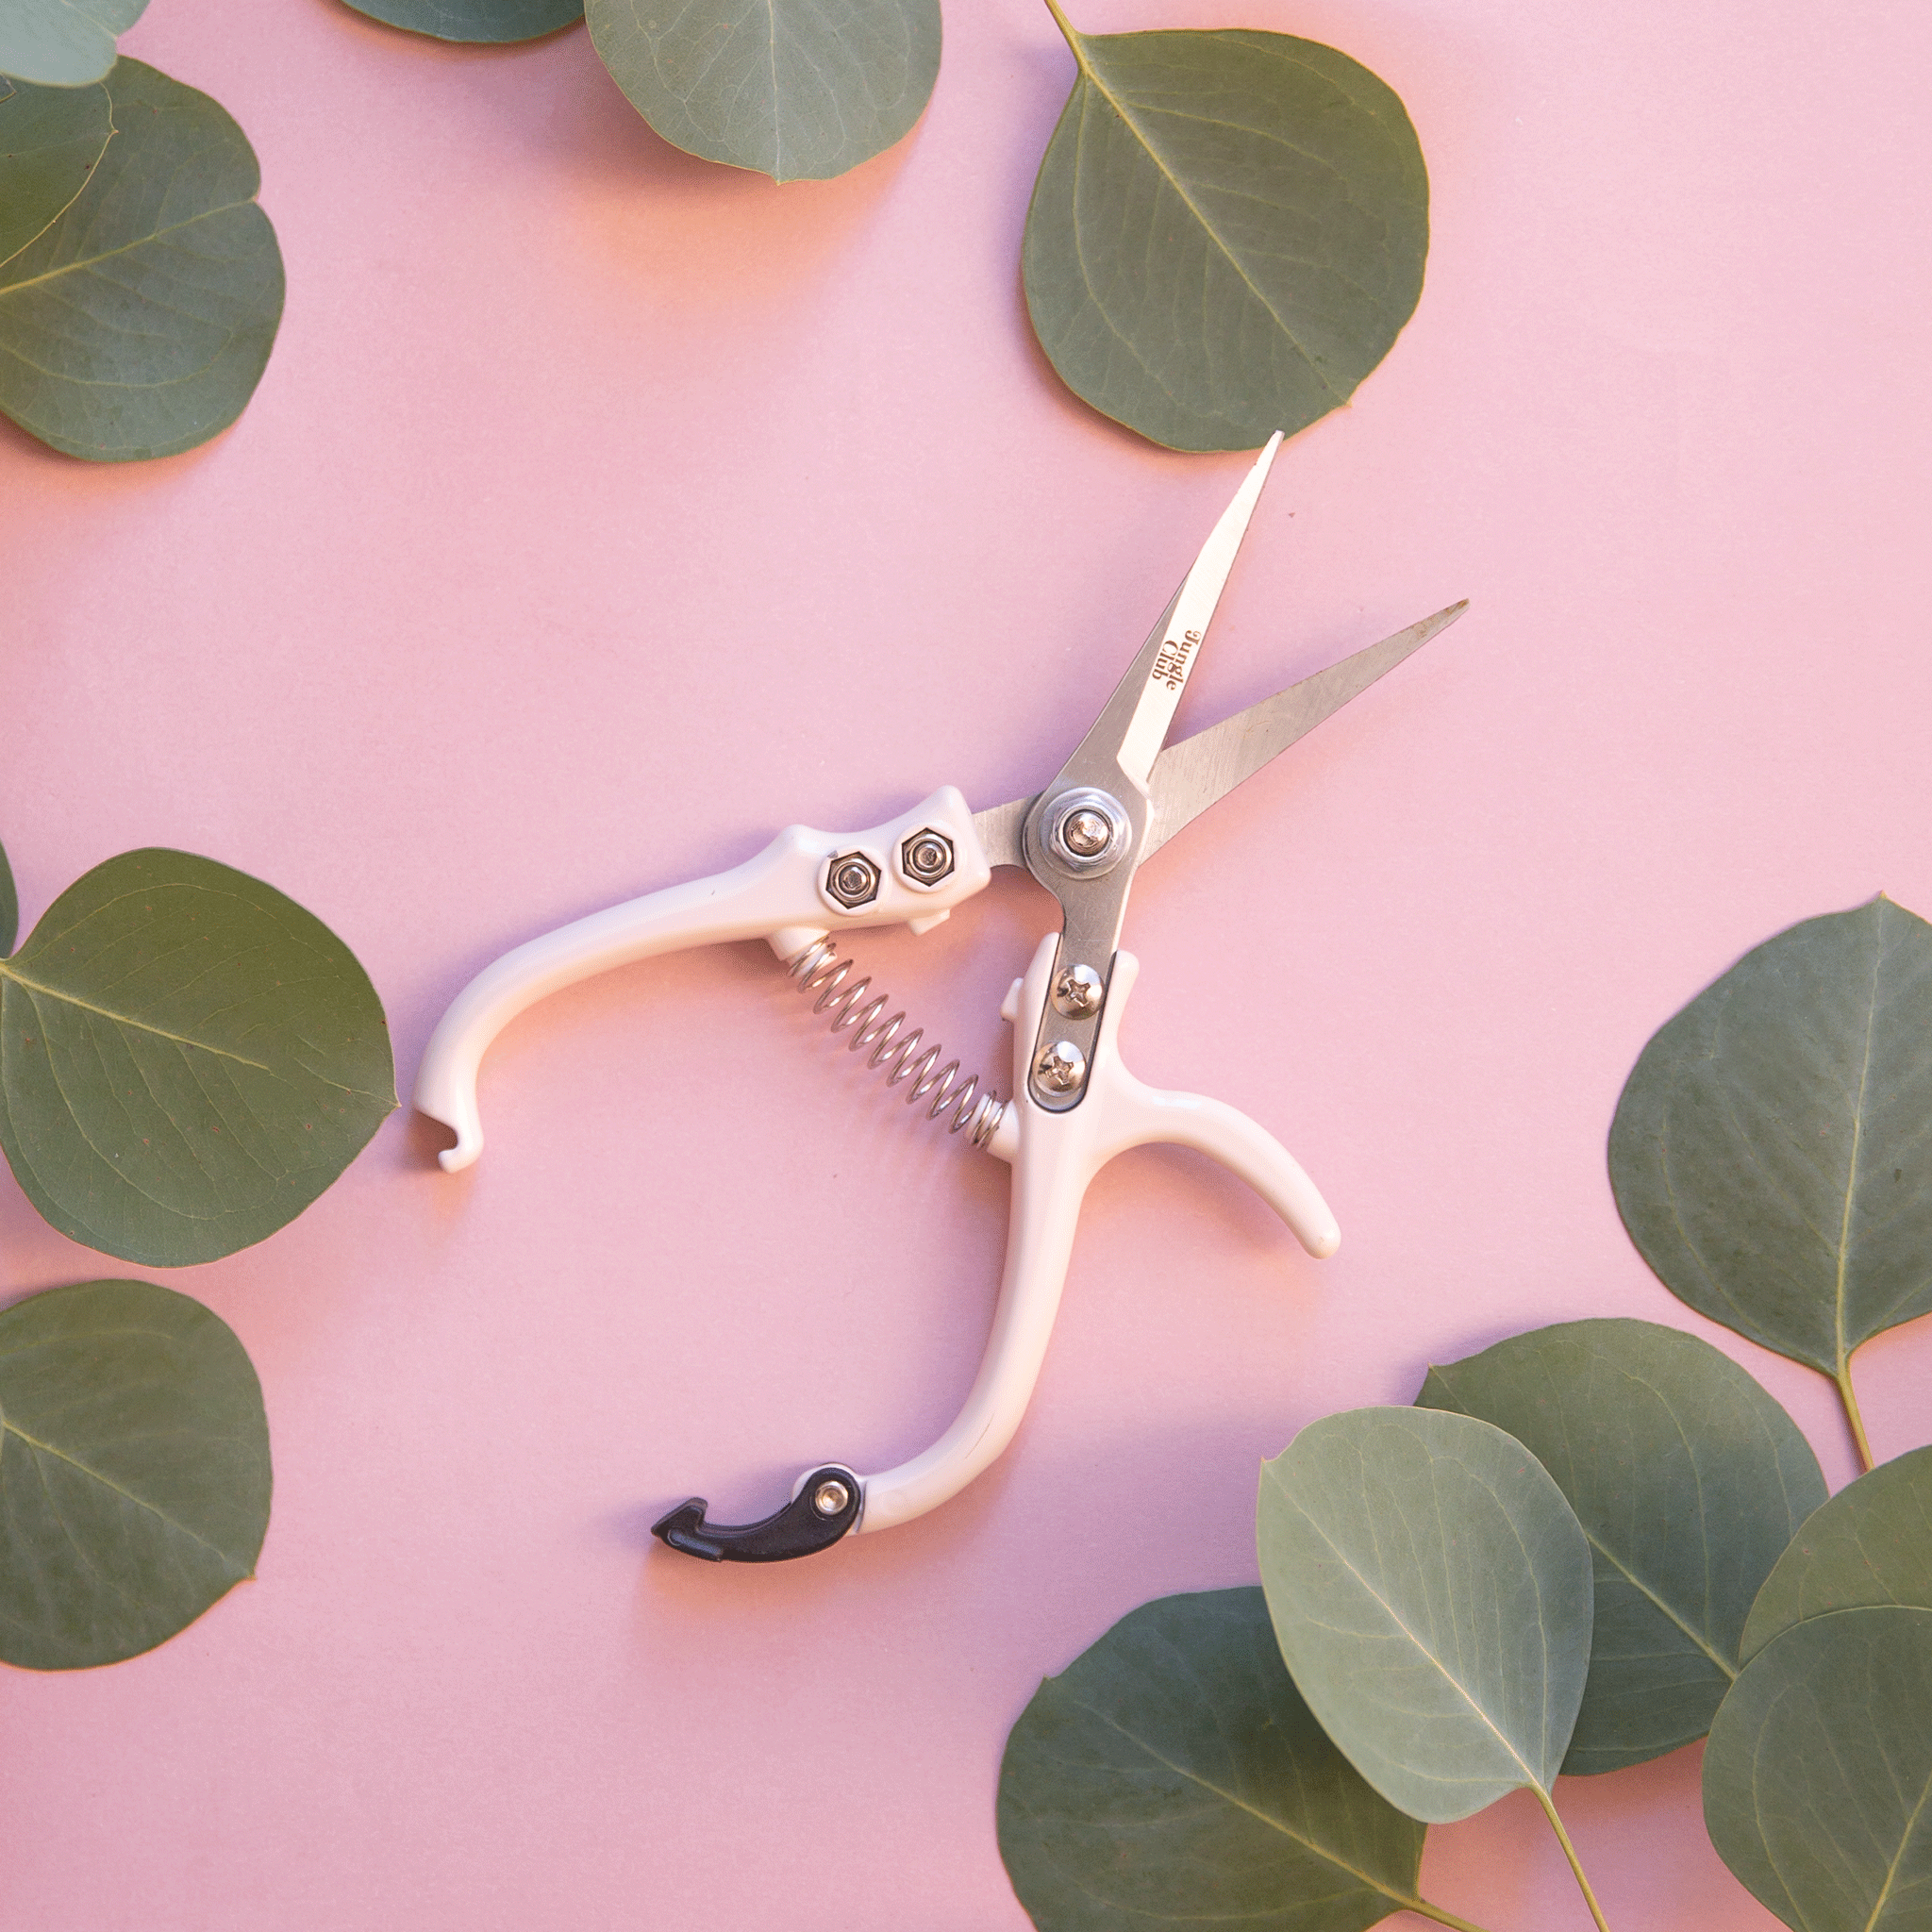 On a pink background surrounded by eucalyptus leaves is a light tan pair of pruning shears with a hook detailing for keeping closed and small text on the mental shear that reads, &quot;Jungle Club&quot;. 